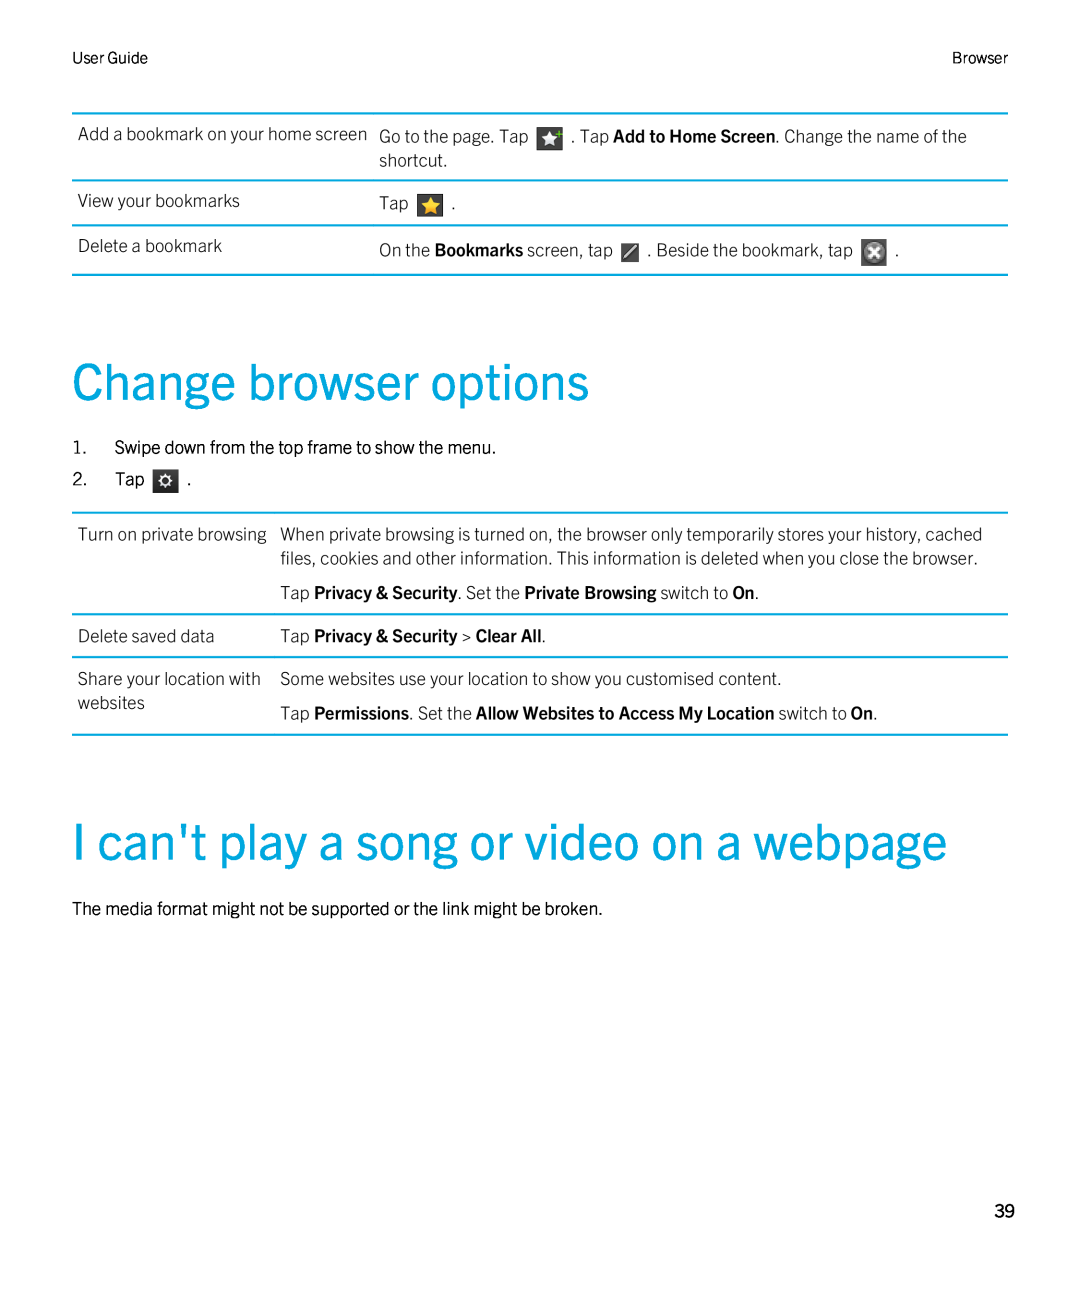 Blackberry 2.0.1 manual Change browser options, I cant play a song or video on a webpage, Tap Privacy & Security Clear All 